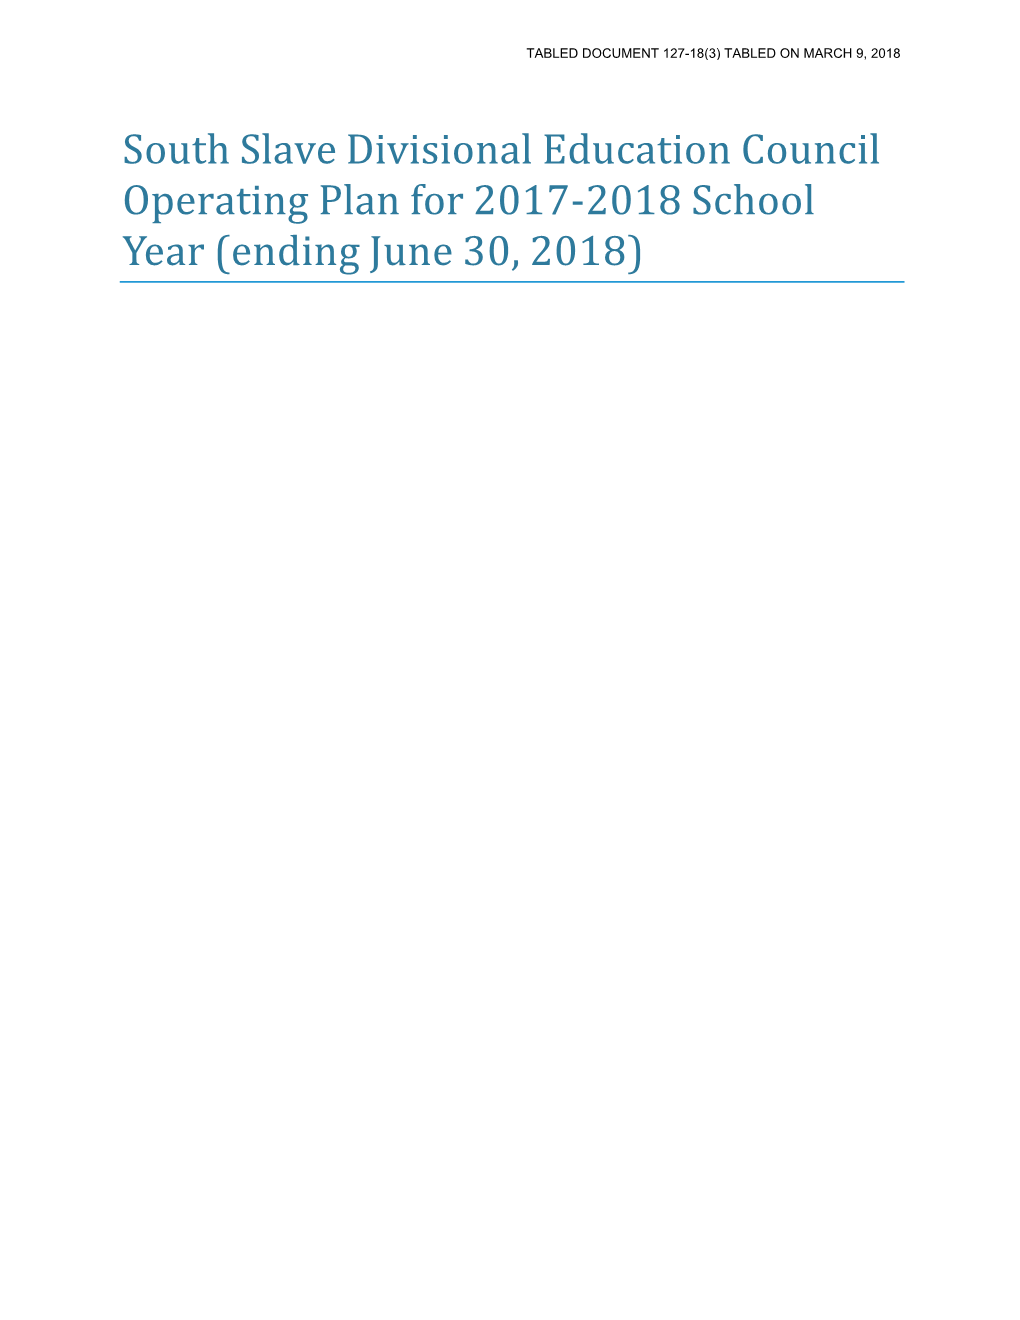 South Slave Divisional Education Council Operating Plan for 2017-2018 School Year (Ending June 30, 2018)